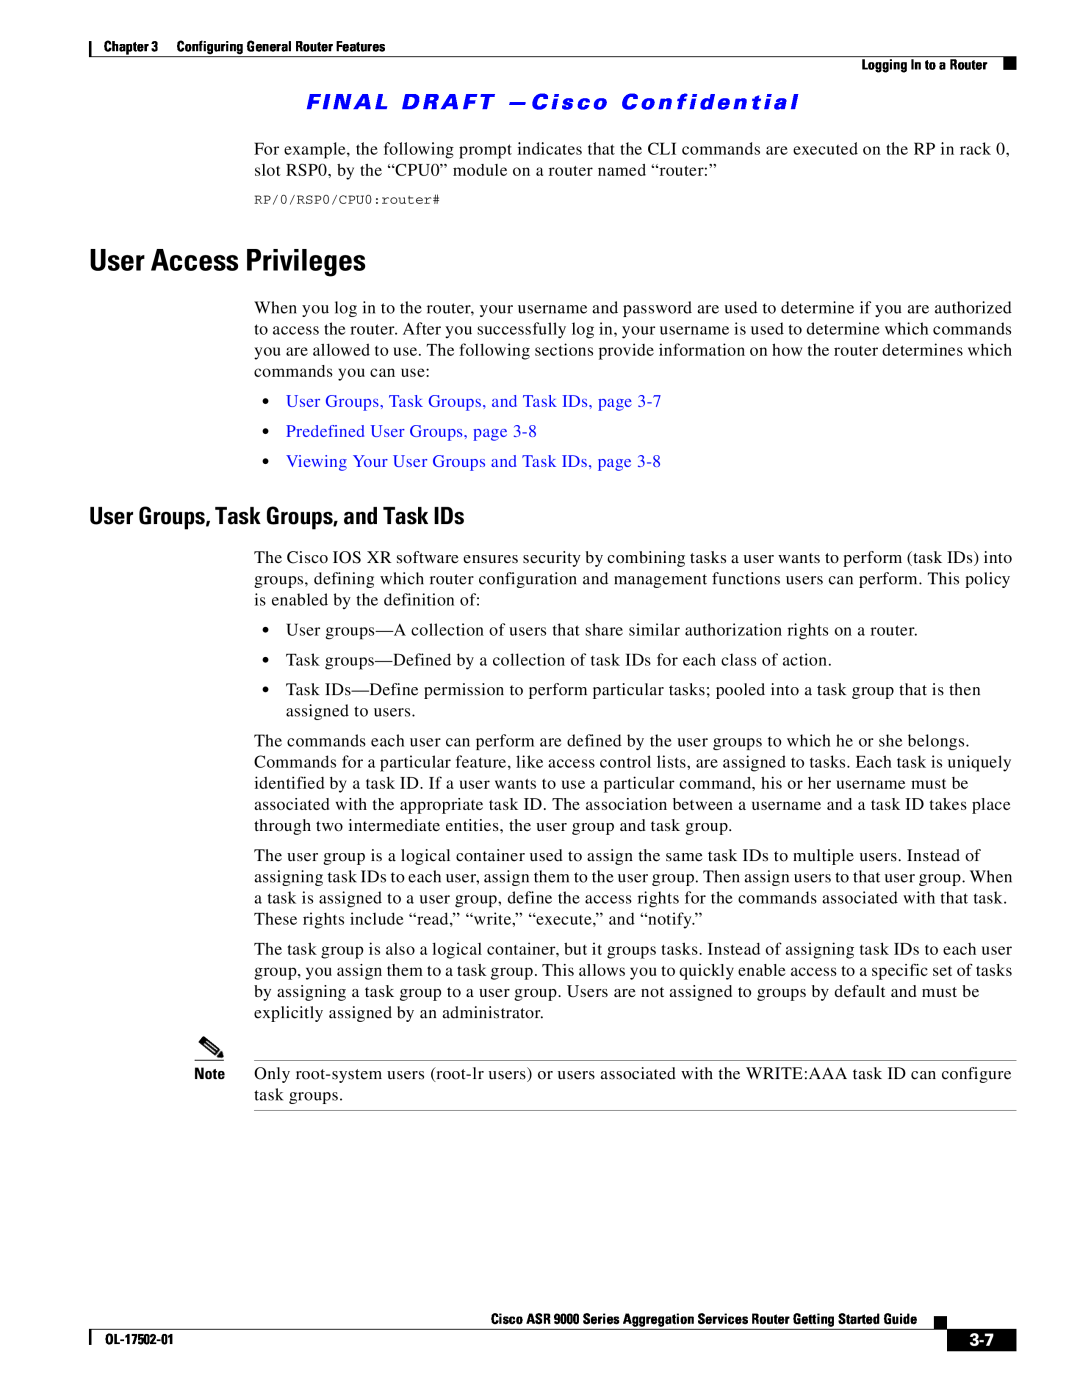 Cisco Systems A9K24X10GETR User Access Privileges, User Groups, Task Groups, and Task IDs, Predefined User Groups, page 